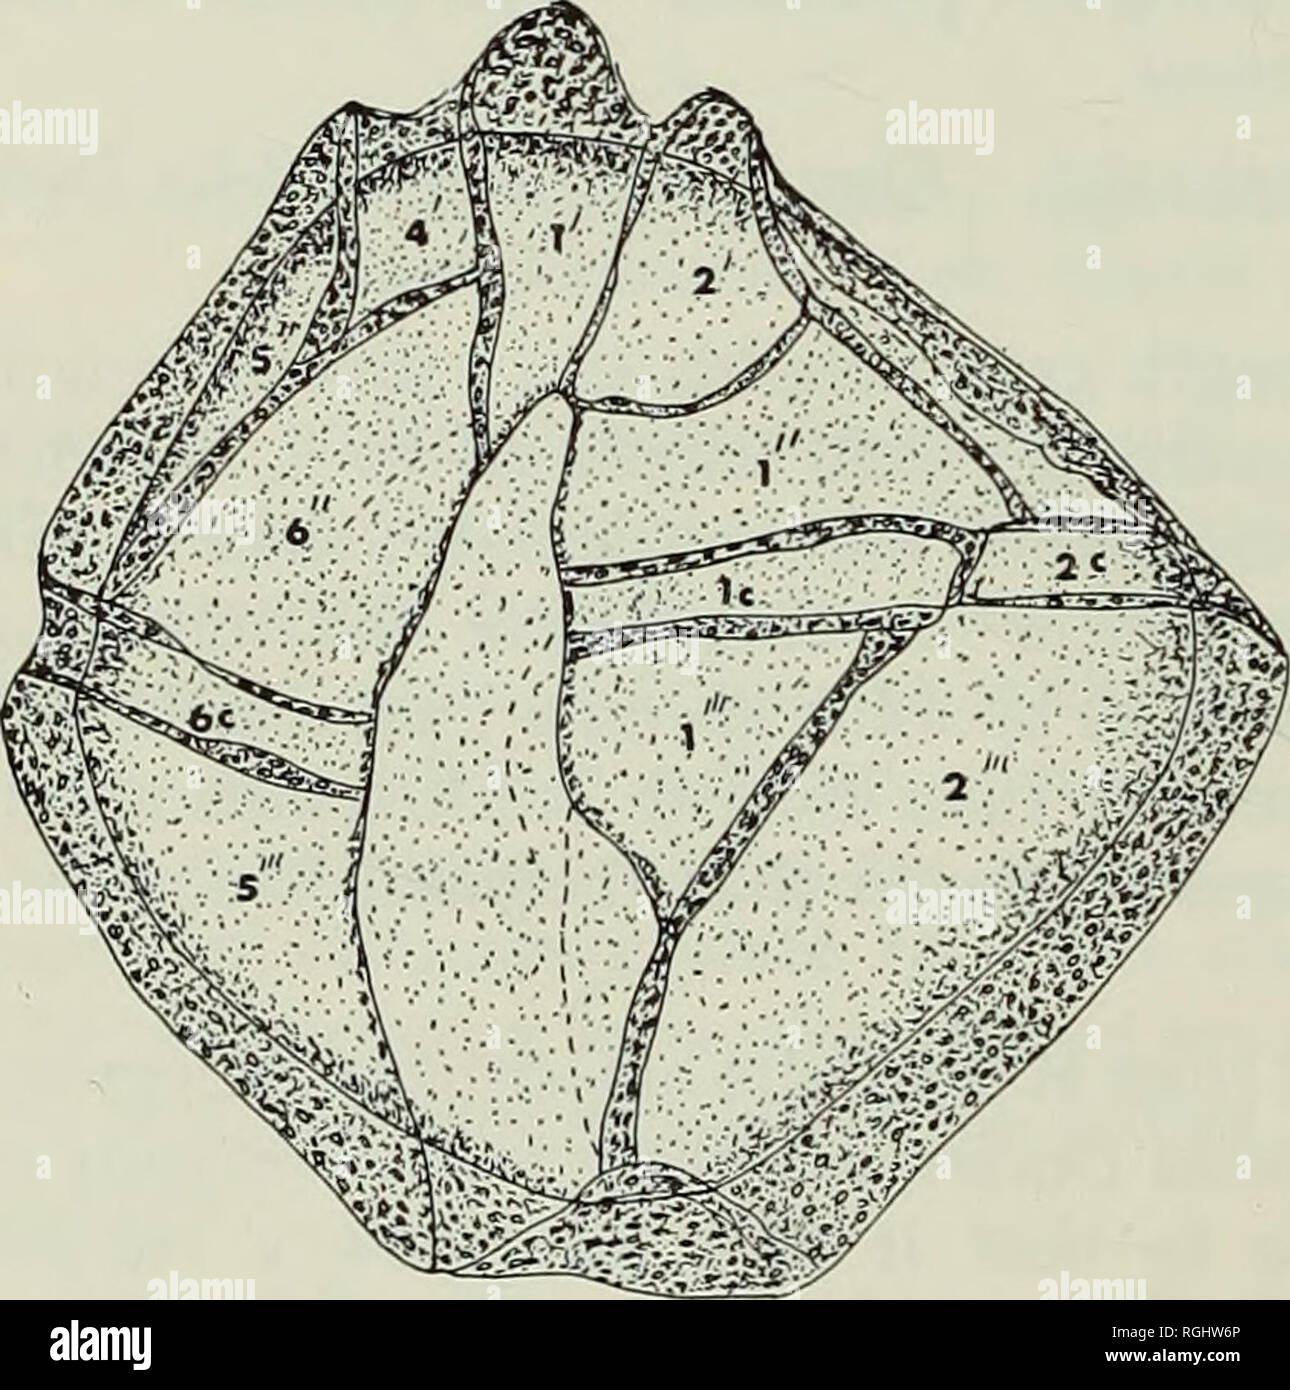 . Bulletin of the British Museum (Natural History), Geology. 3°° DINOFLAGELLATE CYSTS AND ACRITARCHS Cyst-Family ENDOSCRINIAGEAE Vozzhennikova, emend. Sarjeant &amp; Downie, 1966 Genus ENDOSCRINIUM Klement, emend. Vozzhennikova, 1967a Endoscrinium cf. campanula (Gocht) (PI. 5, figs. 9, 10 ; Text-fig. 27) Description. A broadly ovate theca with a blunt, broad apical horn. Tabula- tion : 4', 6&quot; 6c, 5&quot; ', ?ip, o&quot; &quot;. The crests are moderately high and irregularly perforated ; their distal edges are smooth. The cingulum forms a strong laevorota- tory spiral, dividing the theca i Stock Photo